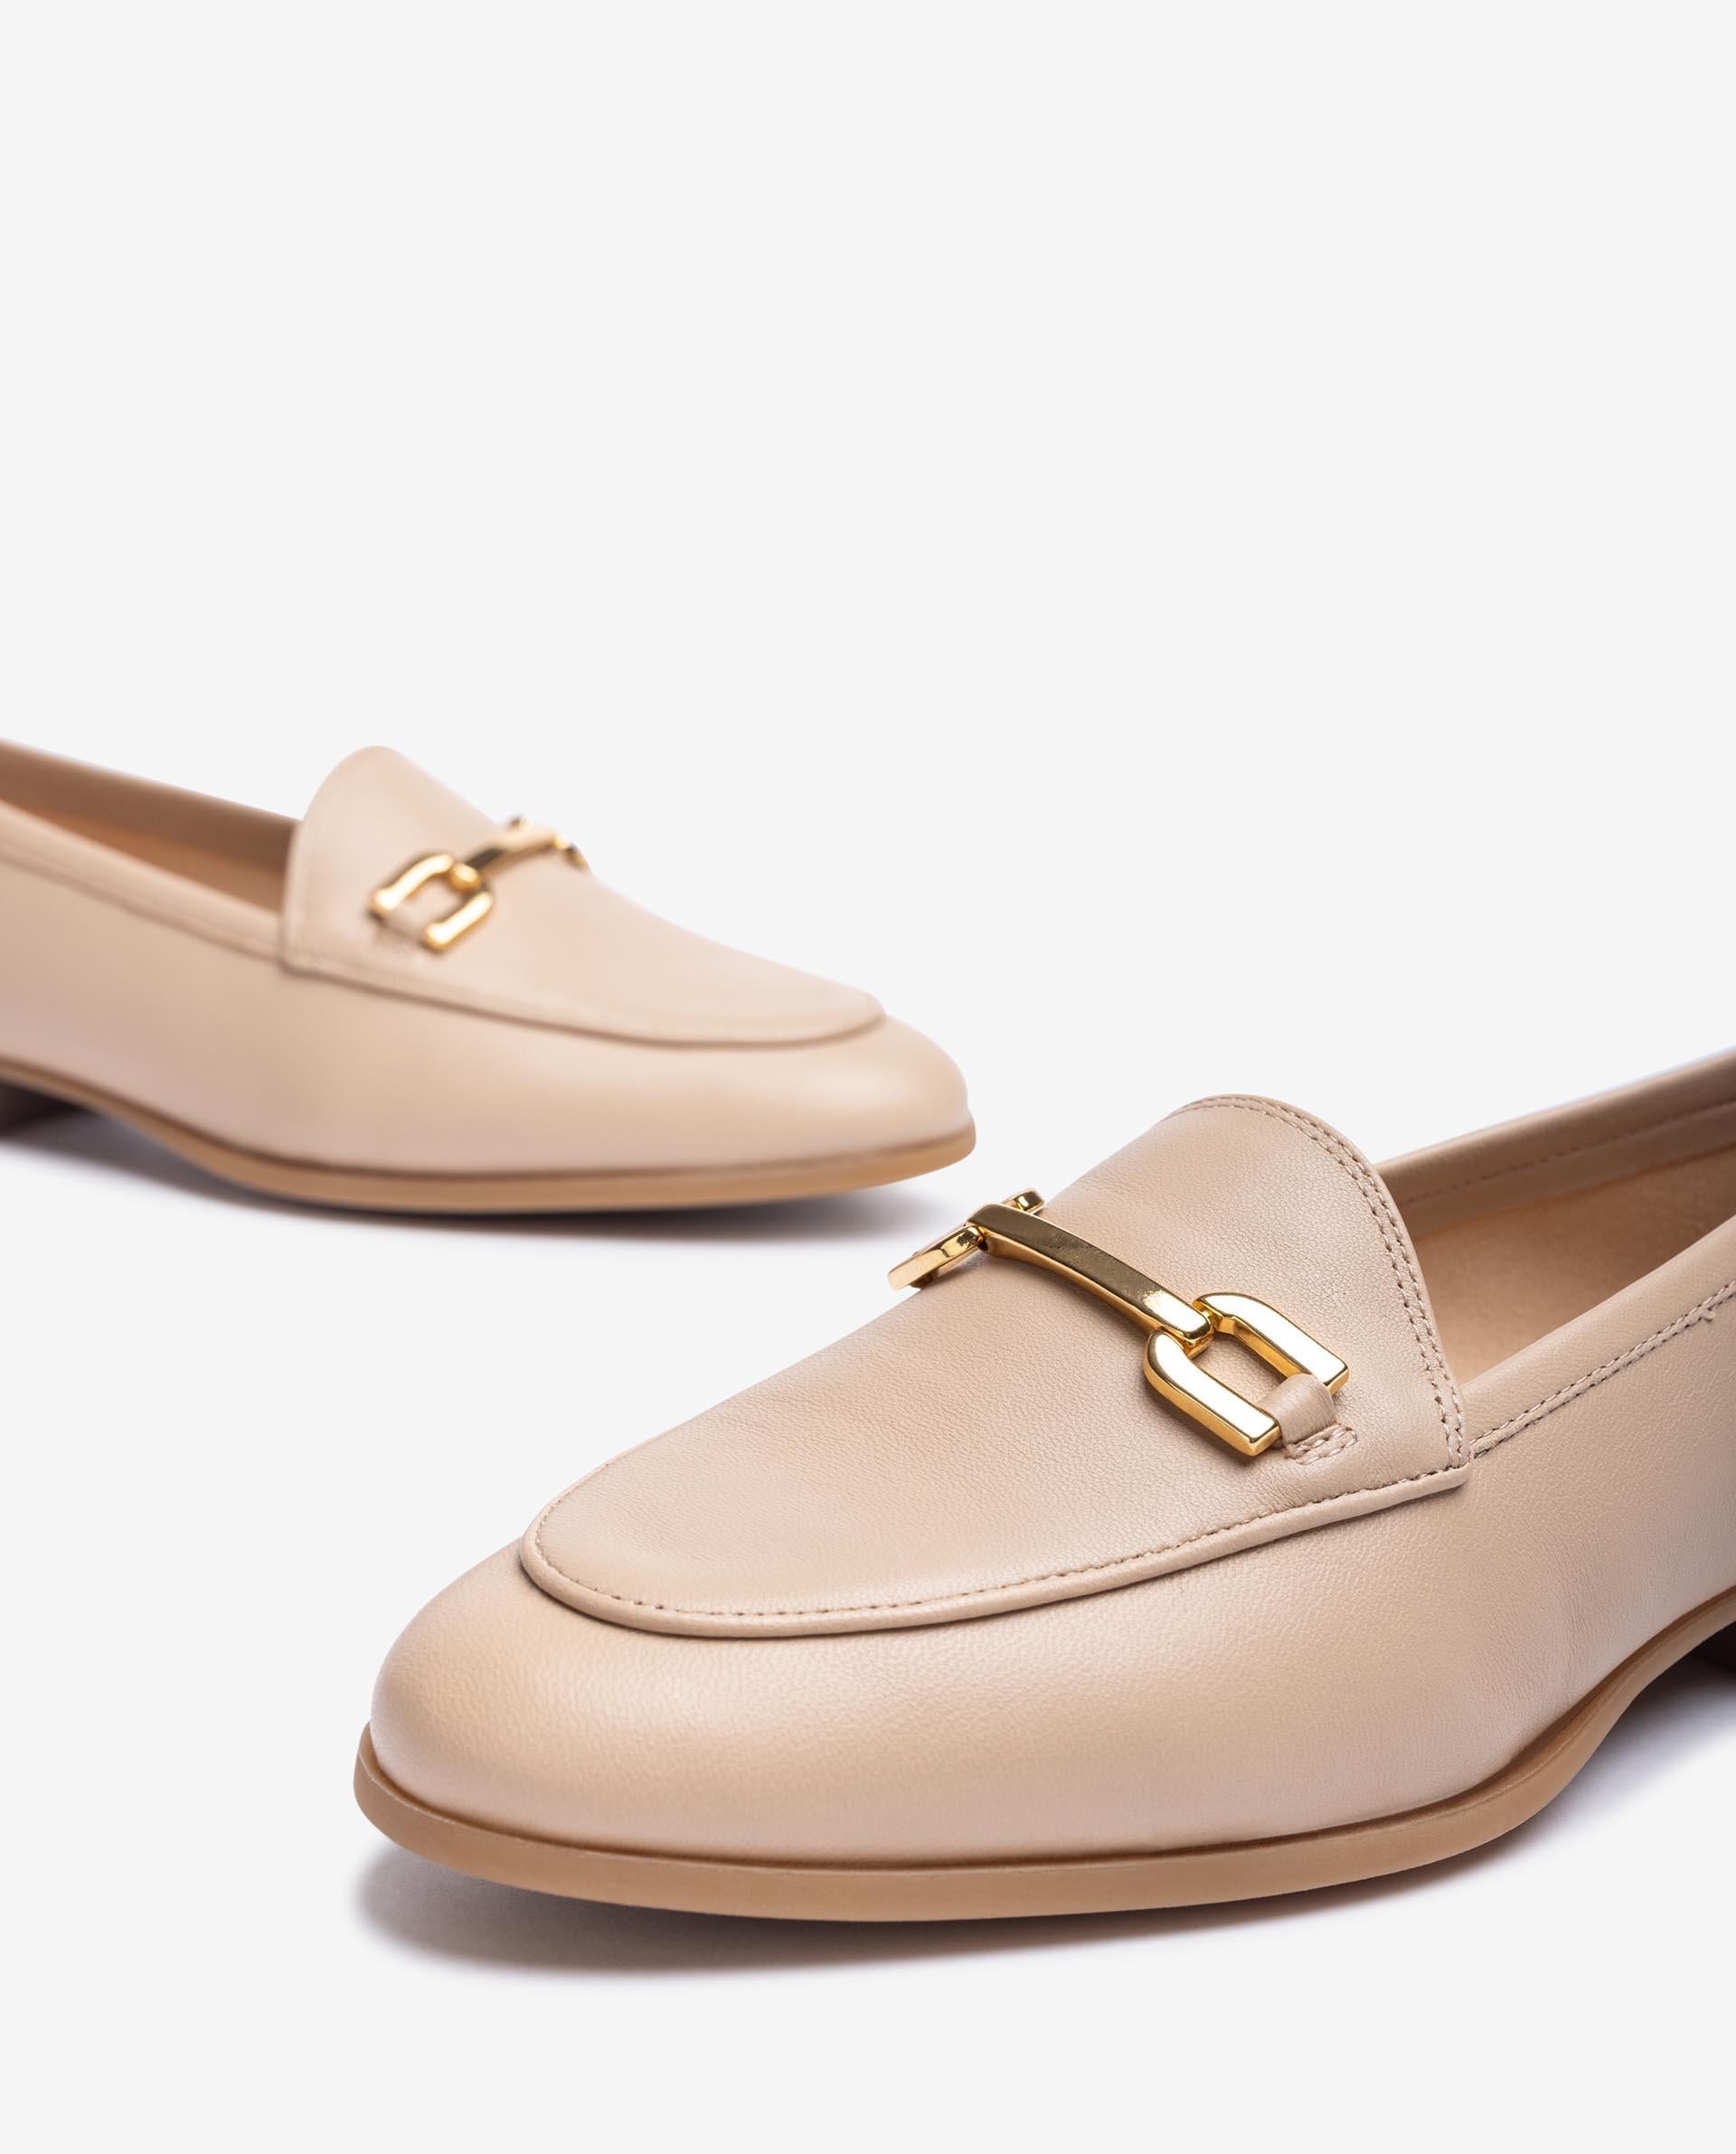 Top view showing the rounded toe shape of the Unisa DALCY Leather Loafer.